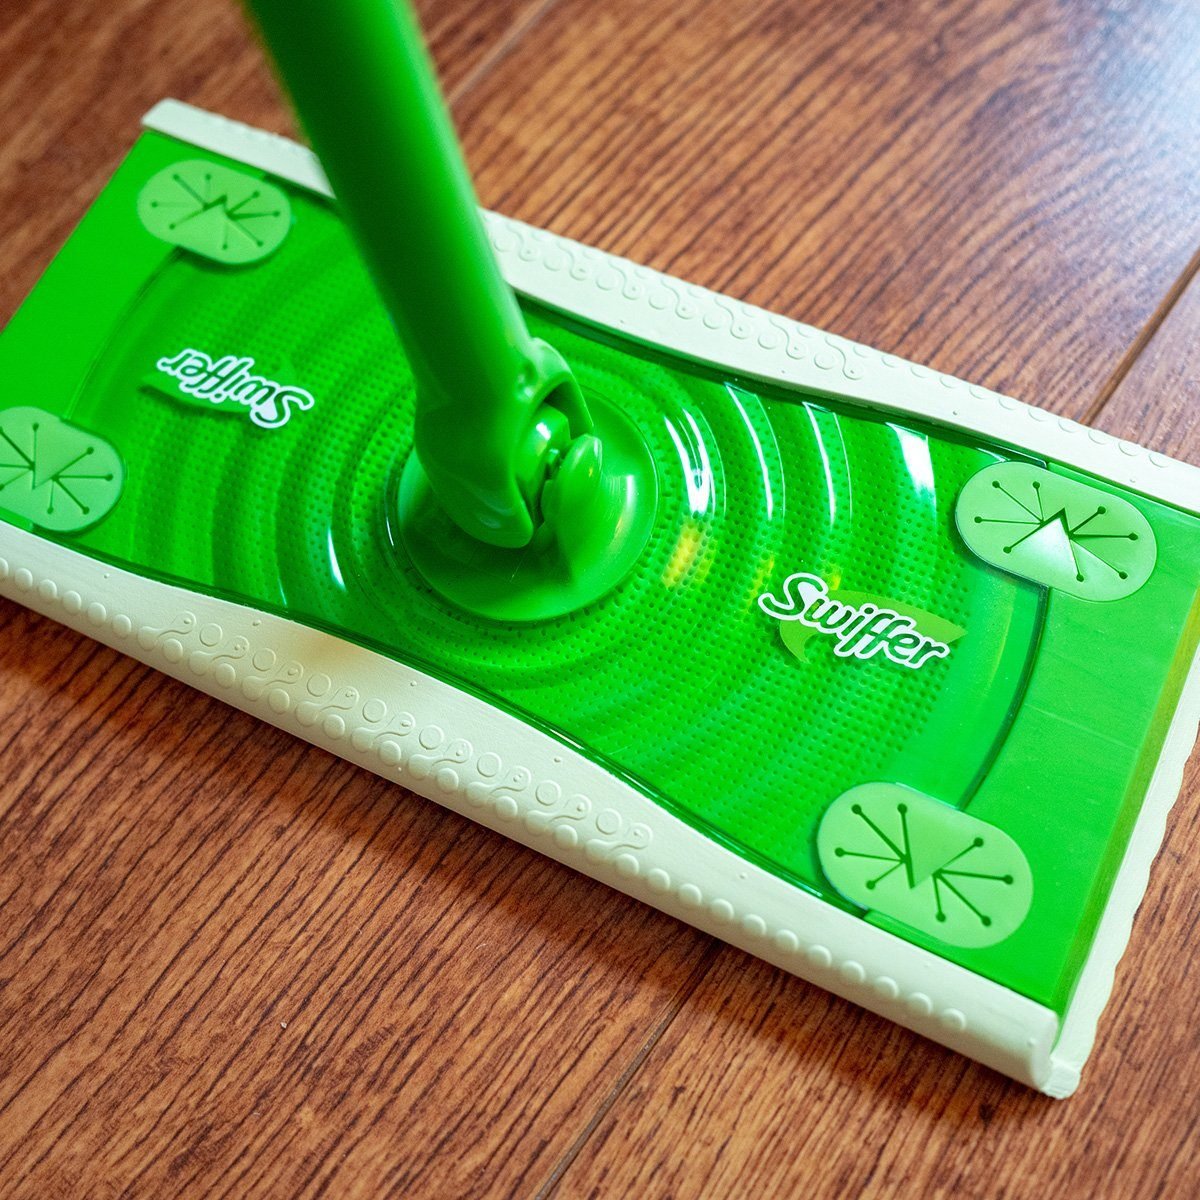 Logo is visible on a Swiffer cleaning device from conglomerate Proctor and Gamble in a home interior setting, San Ramon, California, April 18, 2020. (Photo by Smith Collection/Gado/Getty Images)